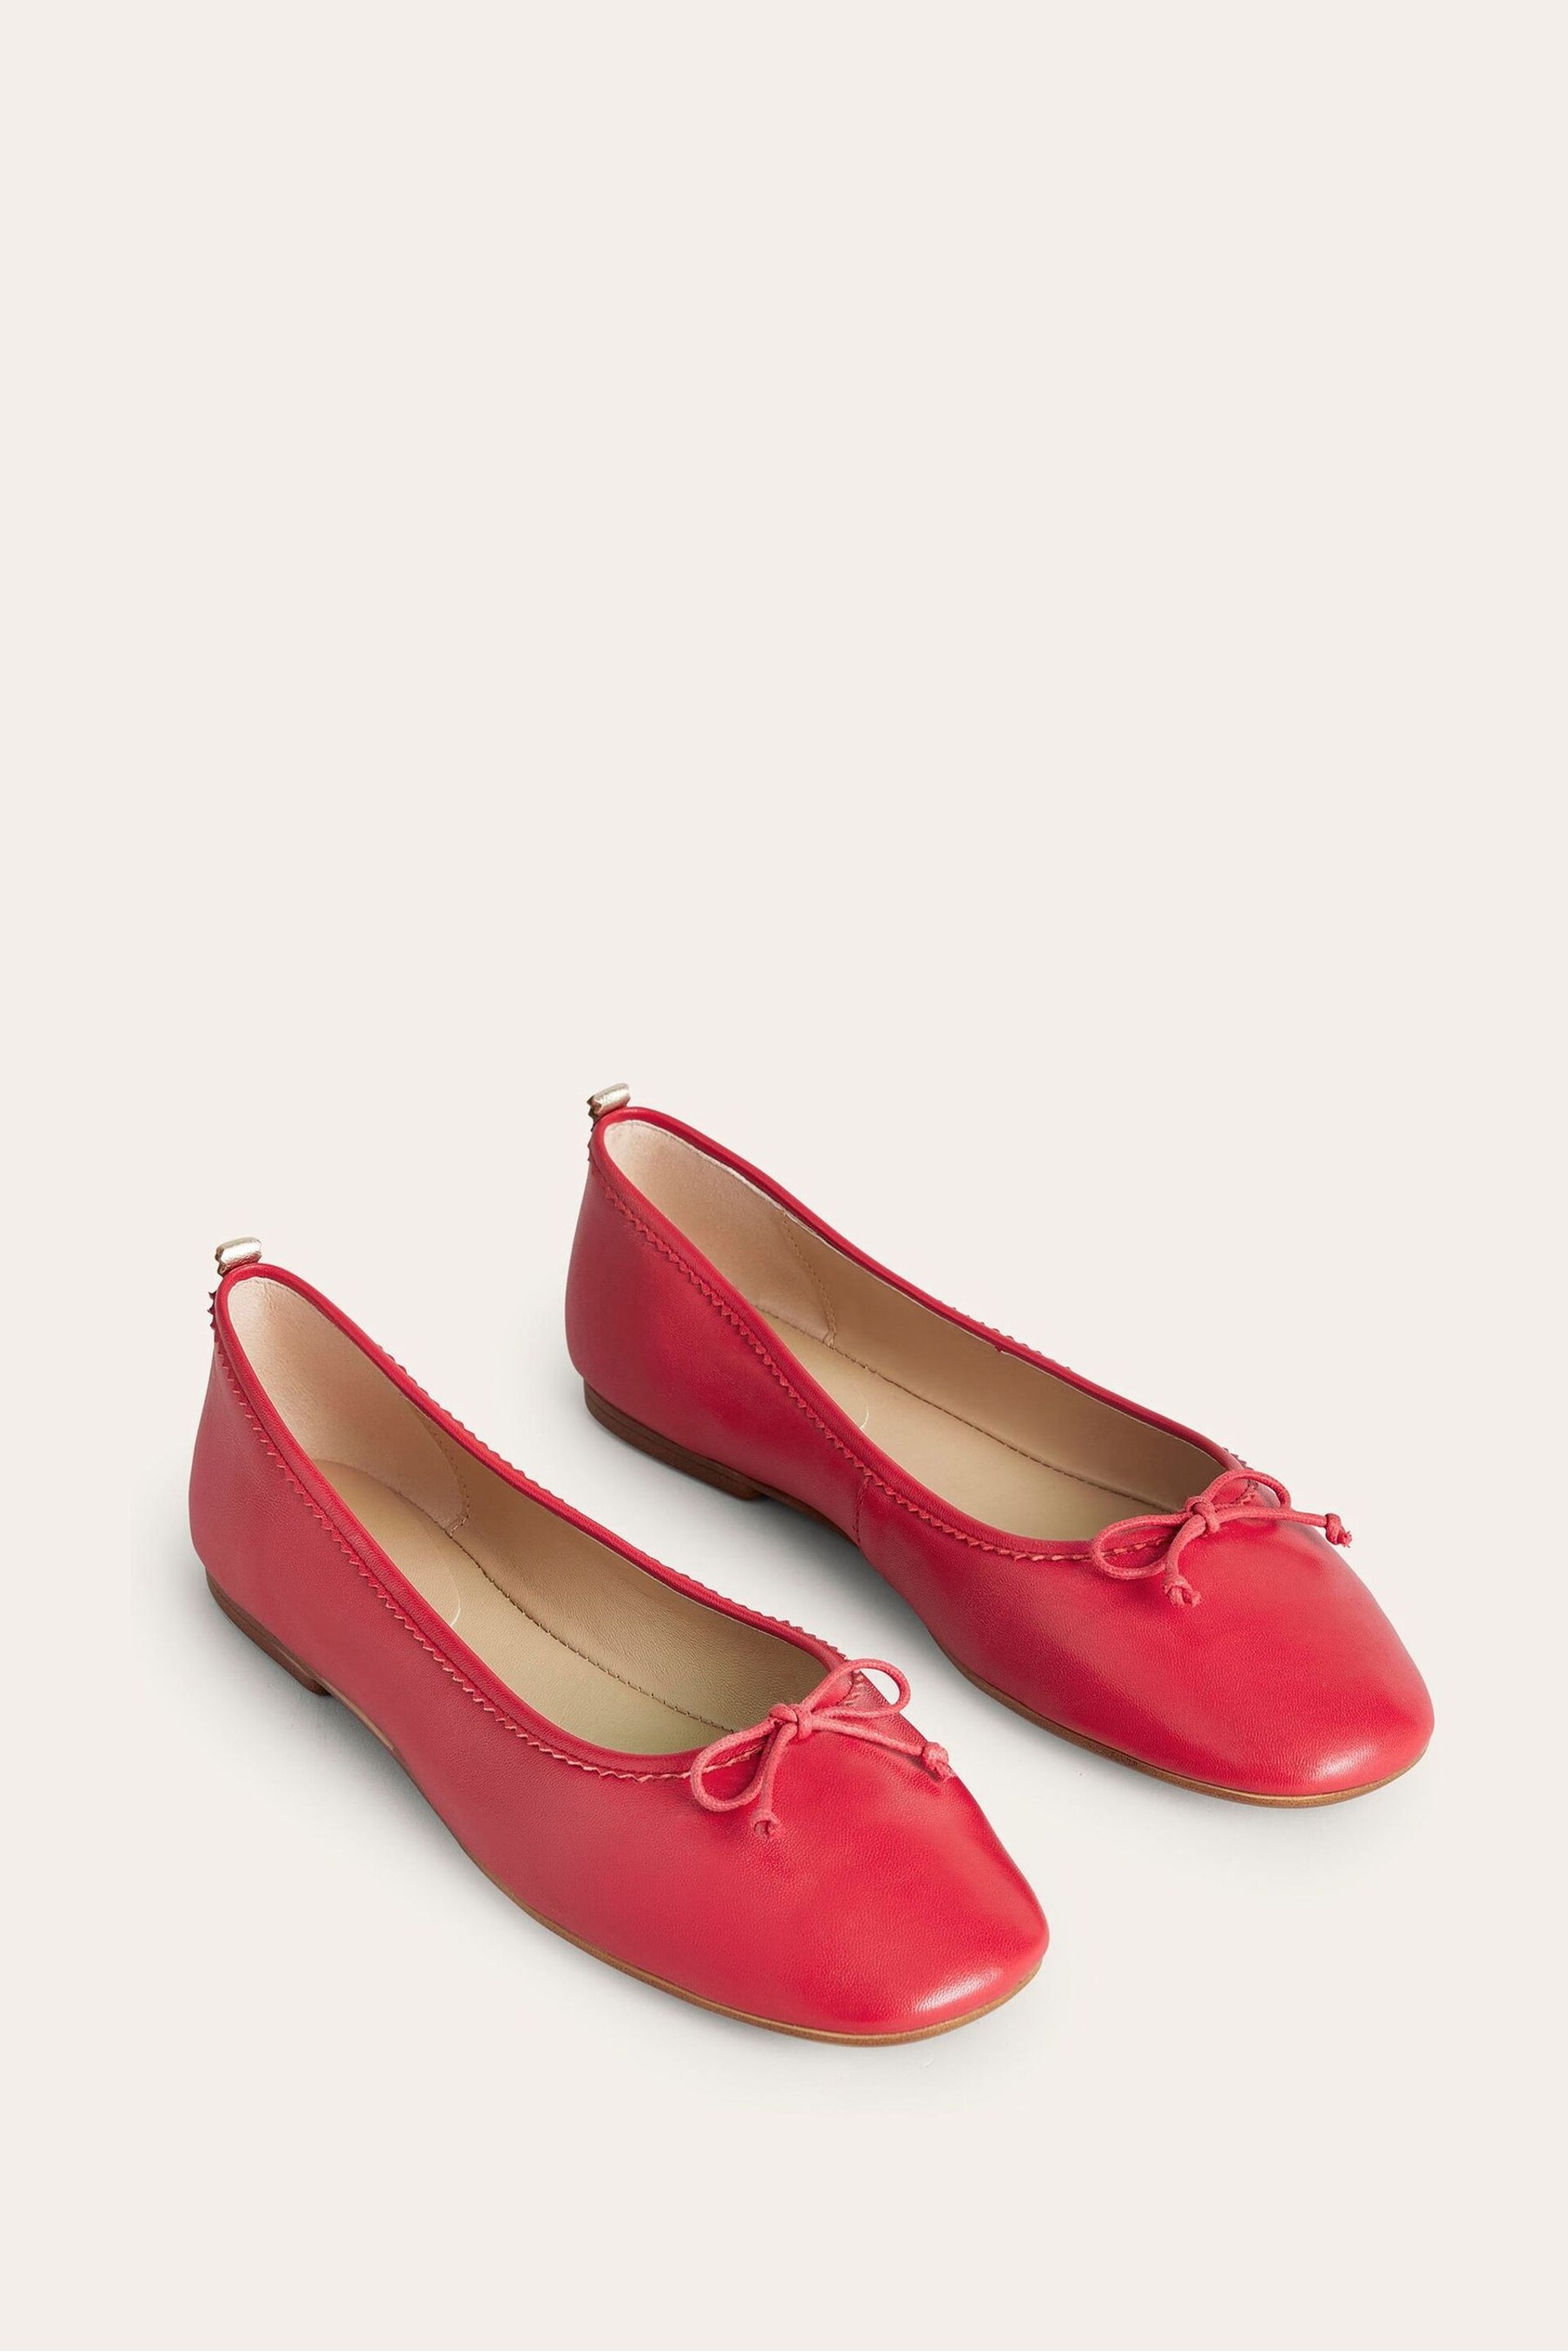 Boden Red Soft Ballet Flats - Image 3 of 4